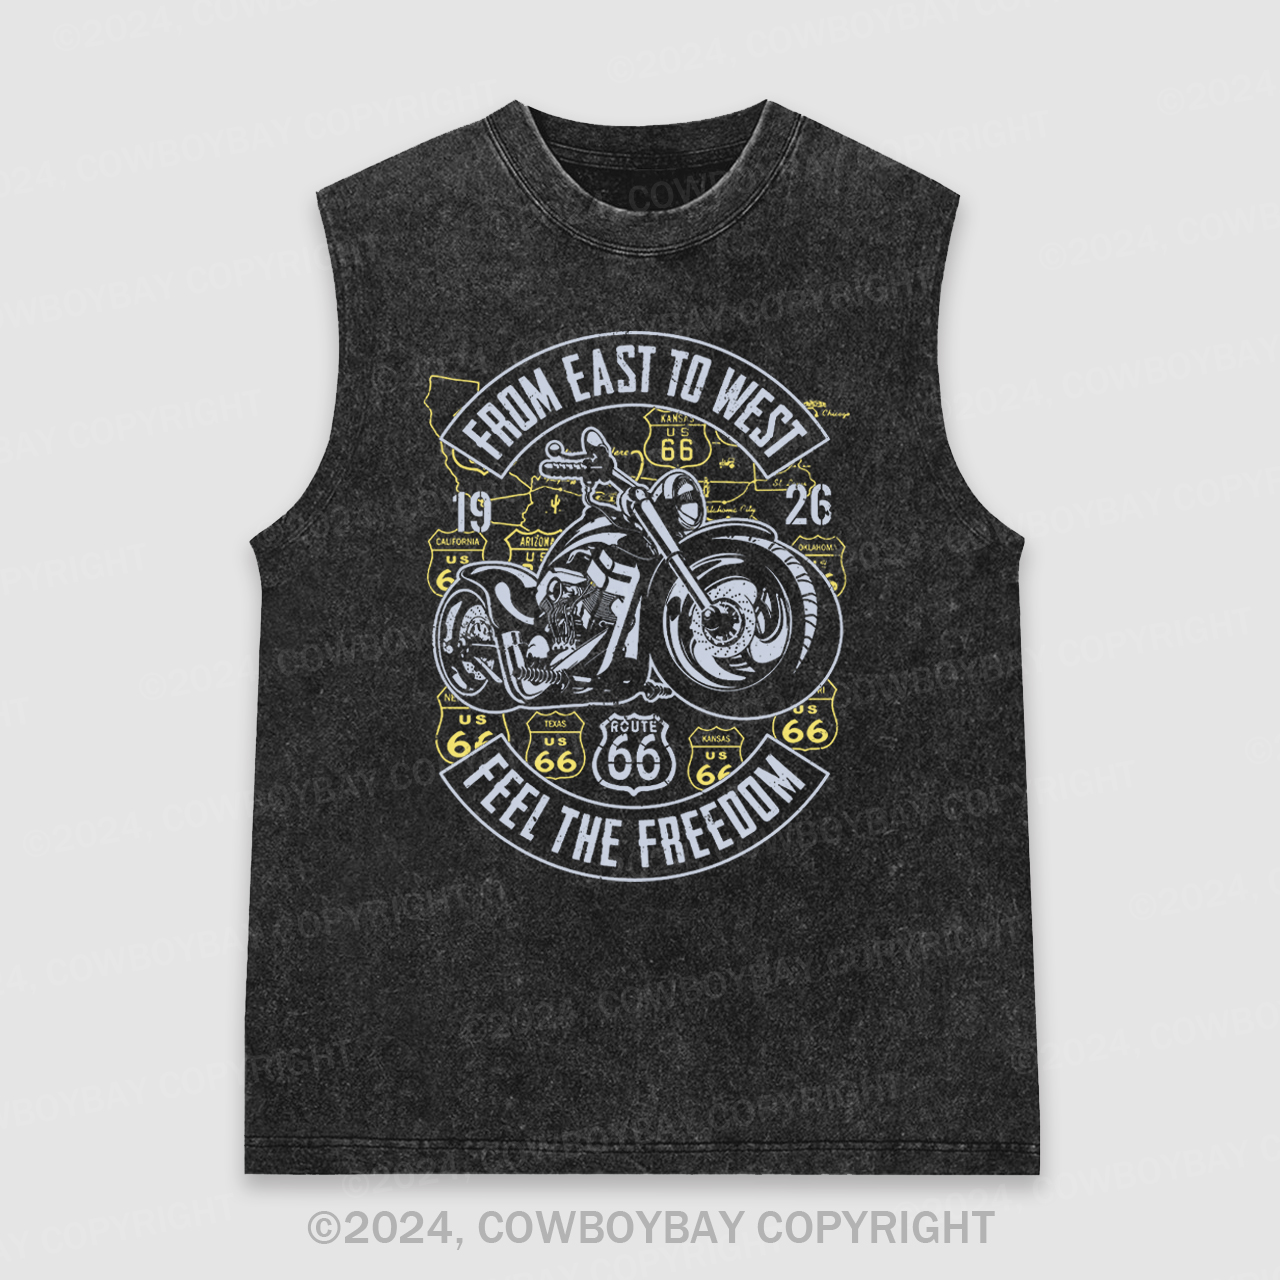 Route 66 From East To West Biker Washed Tanks